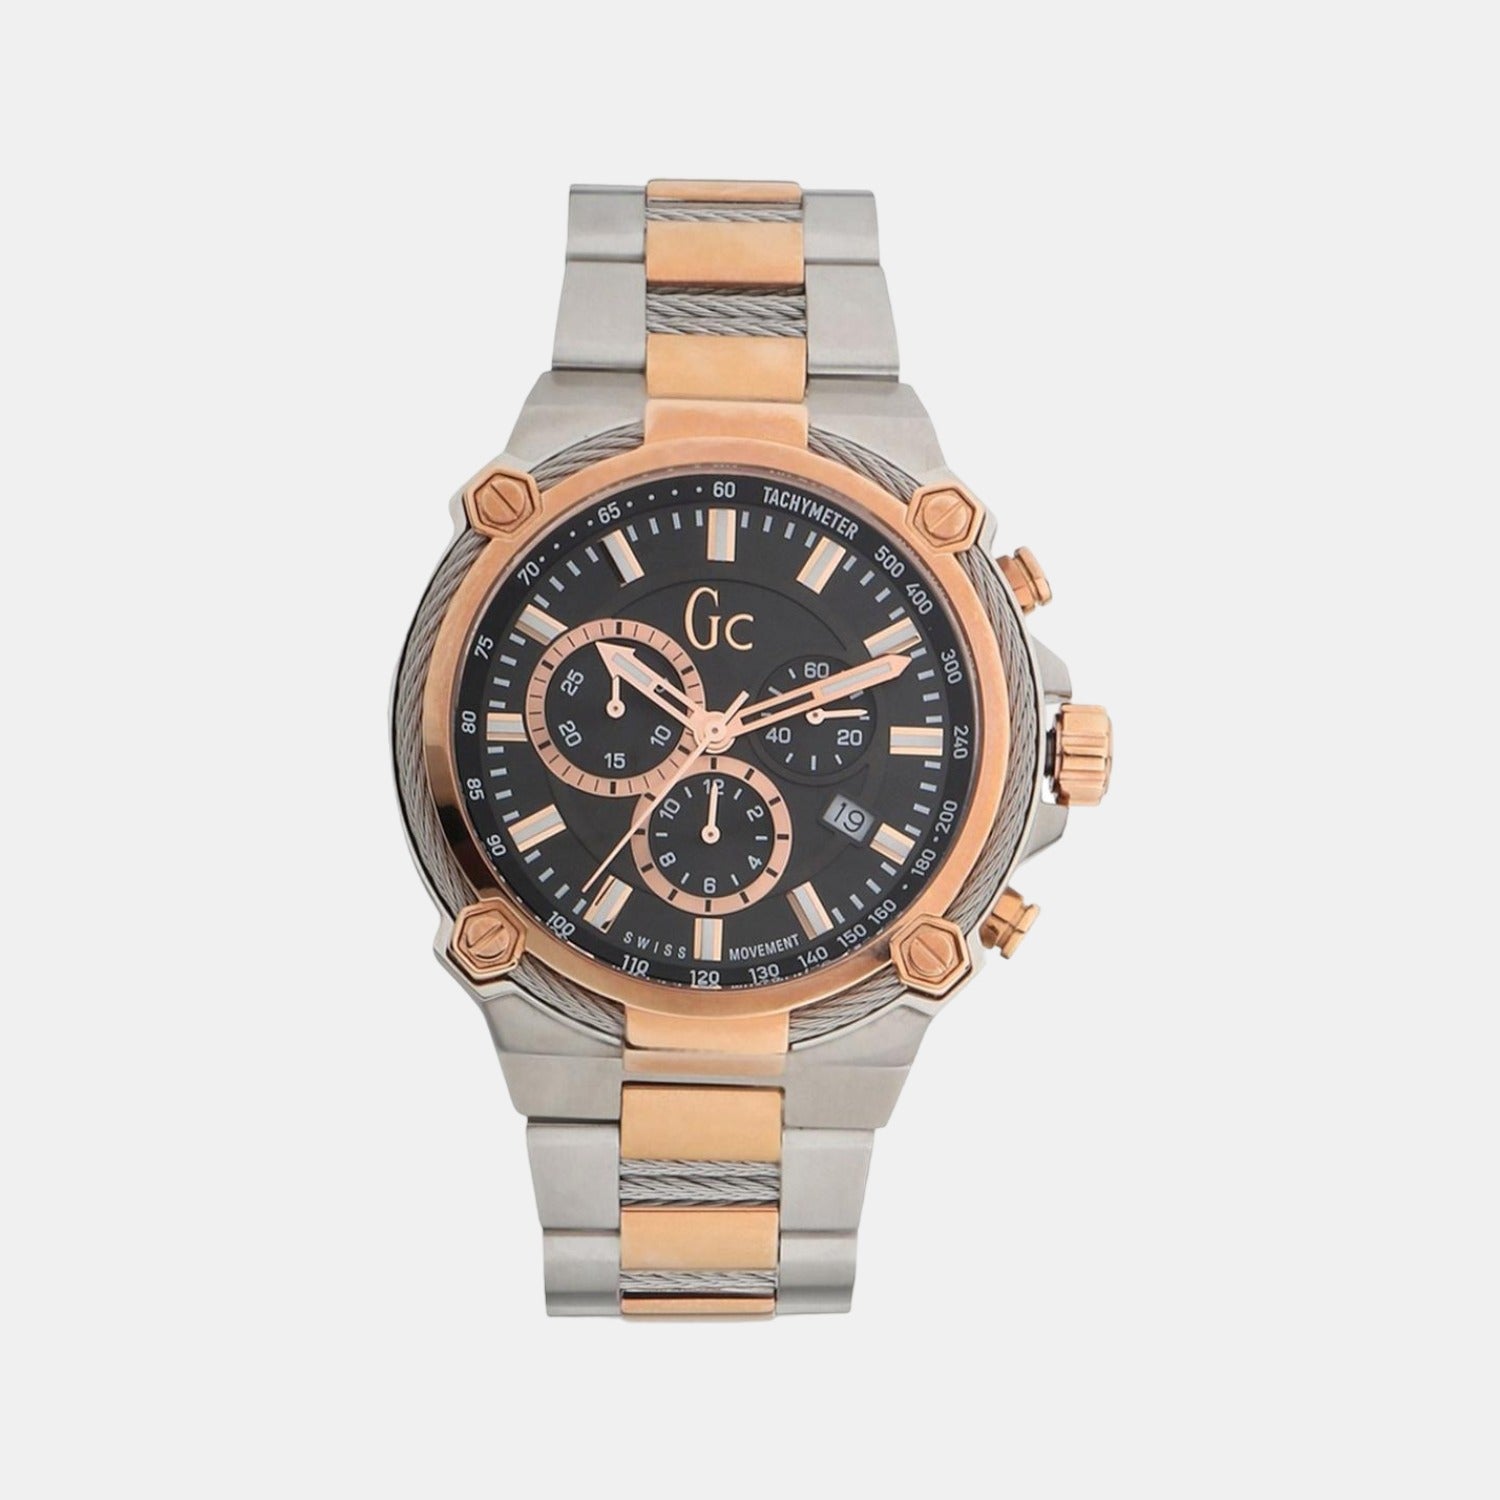 Round Analog GC Watch For Men, For Daily at Rs 5000 in Surat | ID:  25429663248